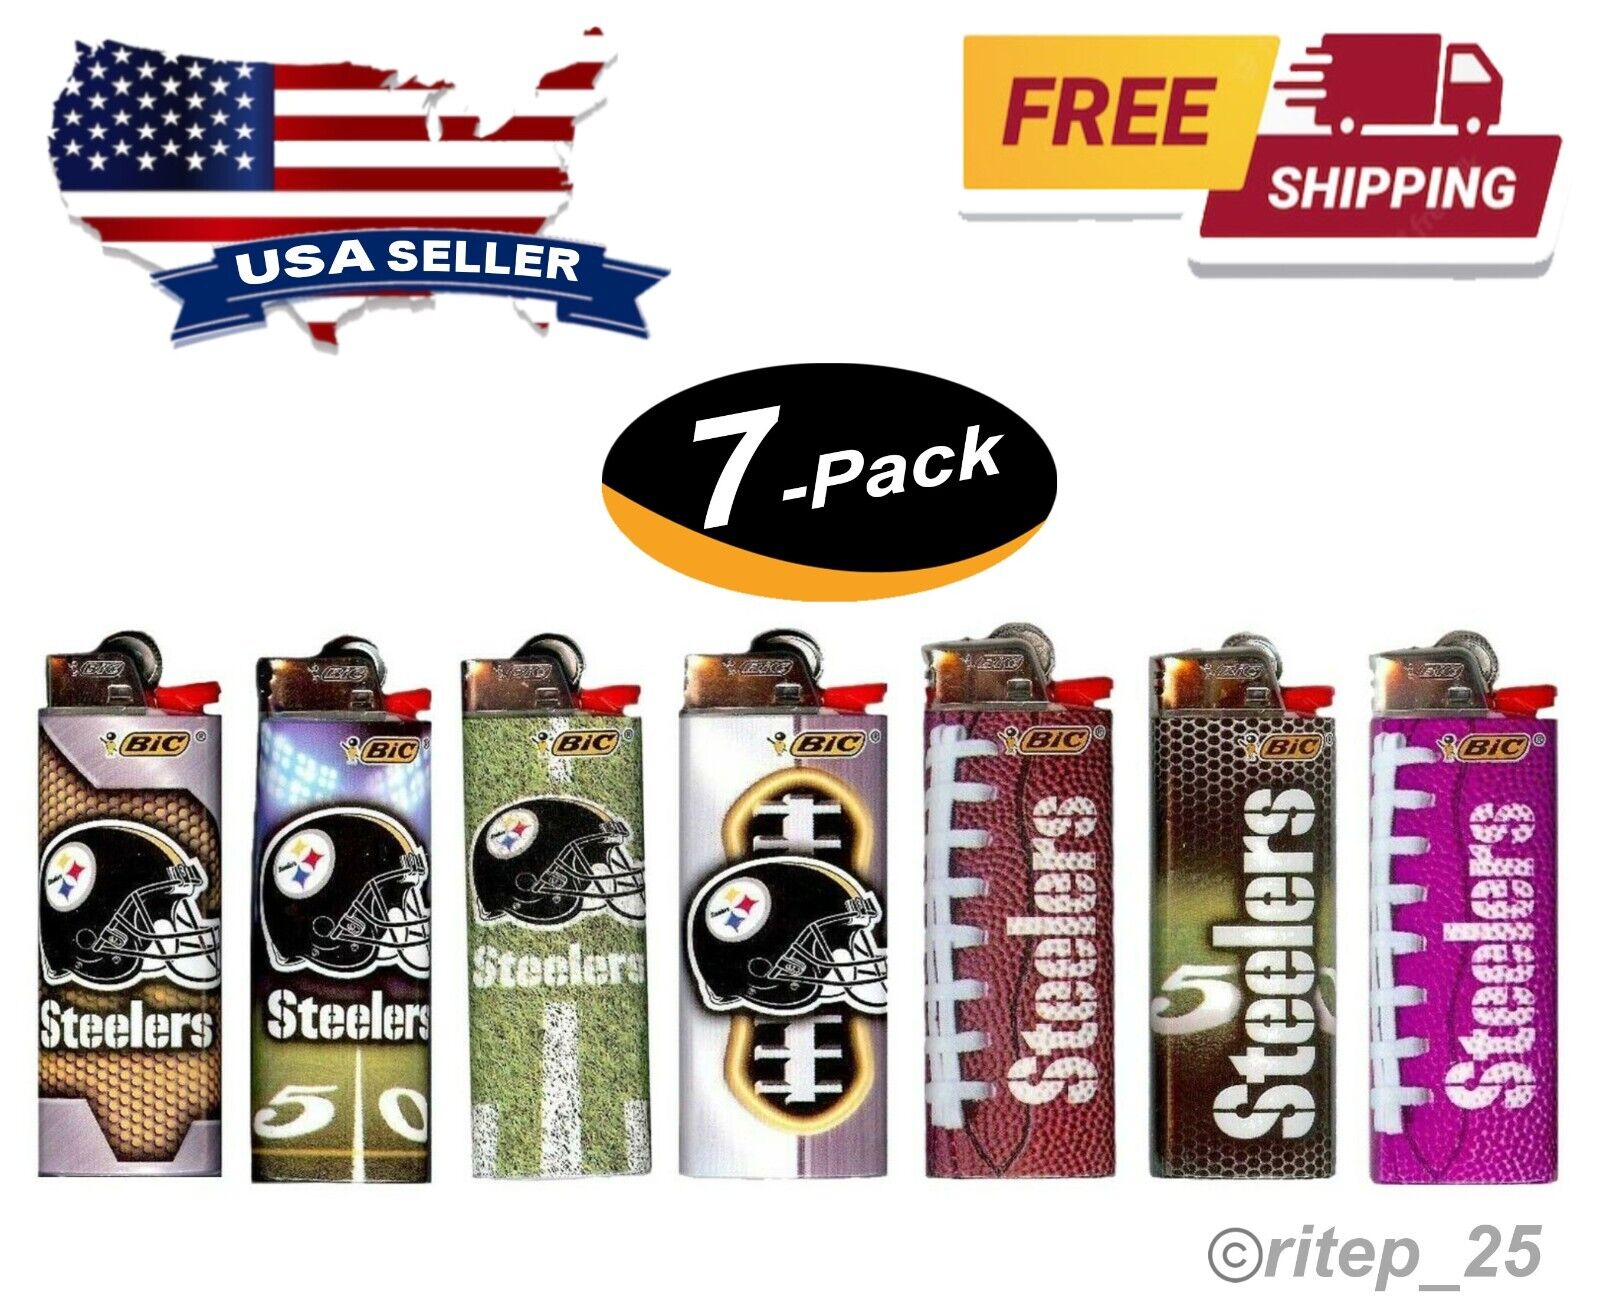 (7 Lighters) Bic Pittsburgh Steelers NFL Officially Licensed Cigarette Lighters